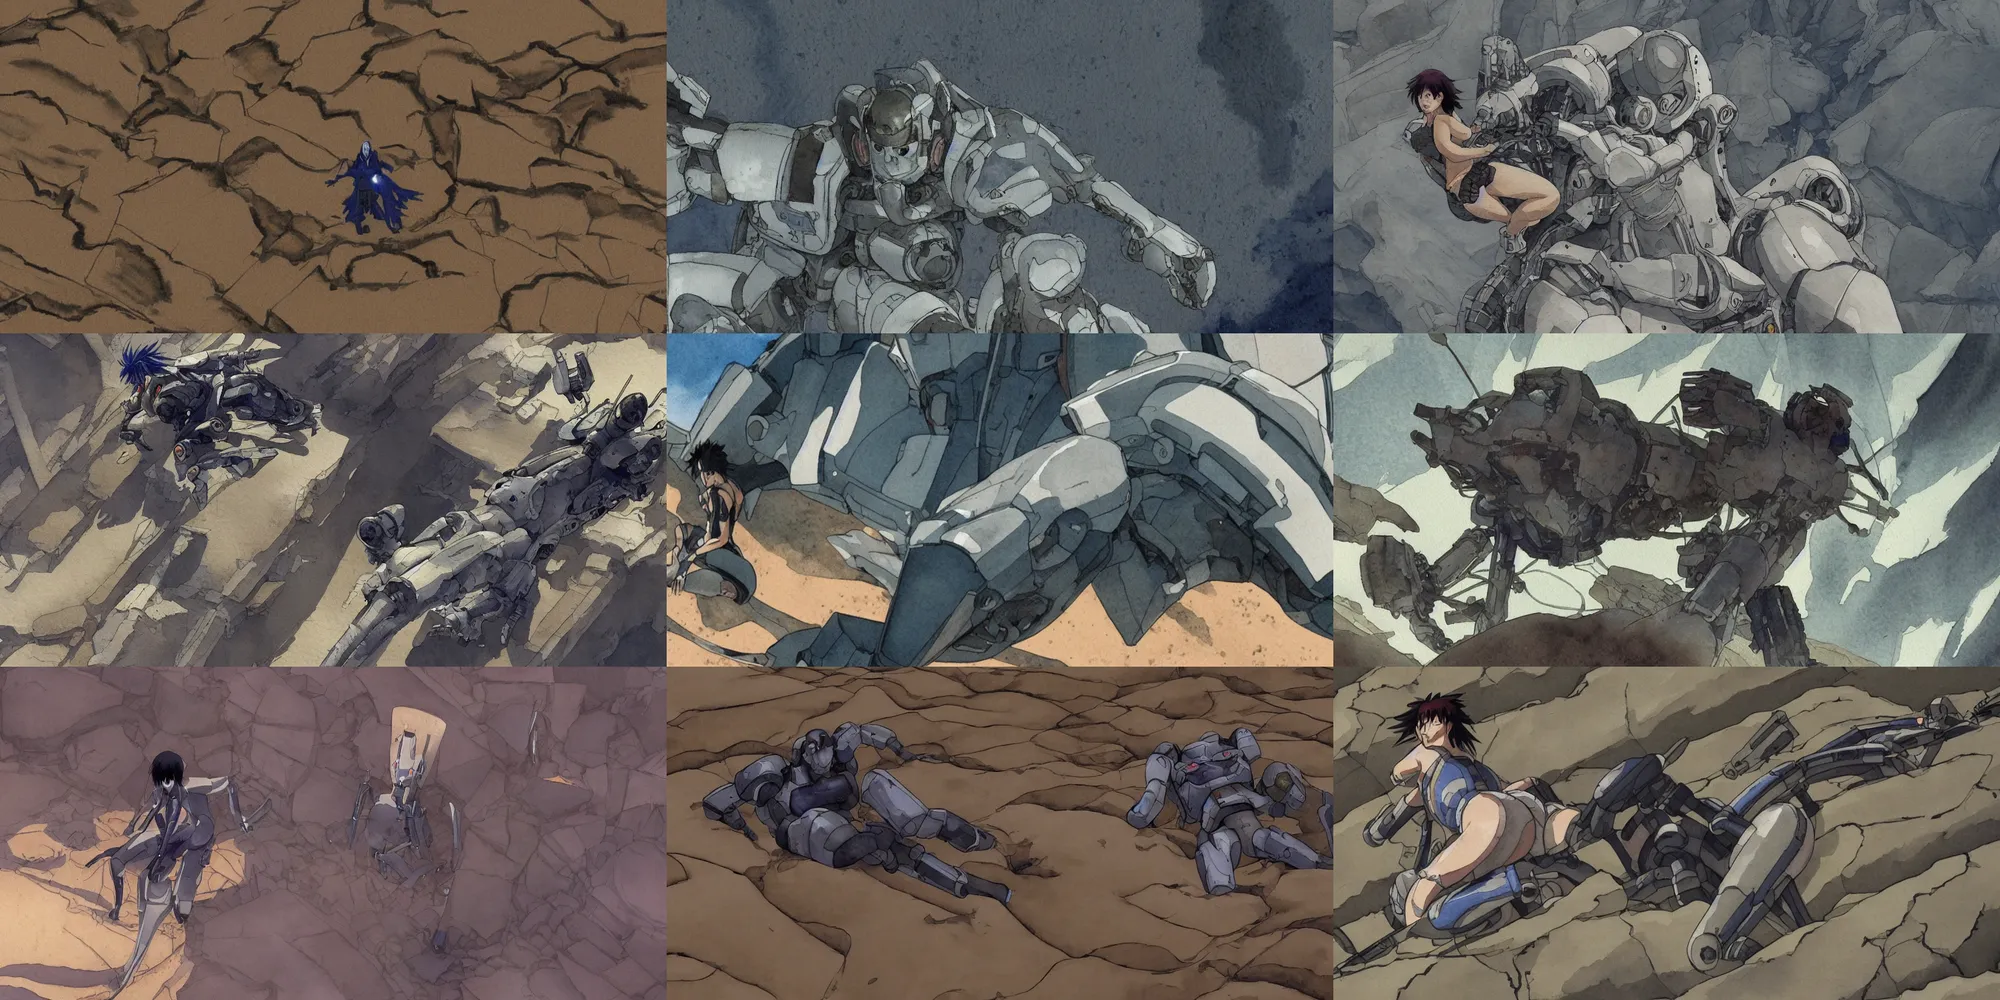 Prompt: incredible high angle screenshot, simple watercolor, masamune shirow ghost in the shell movie scene close up broken Kusanagi, uncovering a rusting robot ribcage and spine poking out of sand dunes, in the desert, crazy looking rocks, chasm, death vally, cracks, brown mud, dust, impossible geometry, falling apart, take cover, bullet holes,last man standing, memorable scene, red, blue, orange, laughing, smiling, pretty eyes, cool hair, melting, danger, death, chaos, bodies on the ground, heavy fog, pipes, metalic reflections, refraction, bounce light, phil hale, Yoji Shinkawa, bright rim light, hd, 4k, remaster, dynamic camera angle, deep 3 point perspective, fish eye, dynamic scene